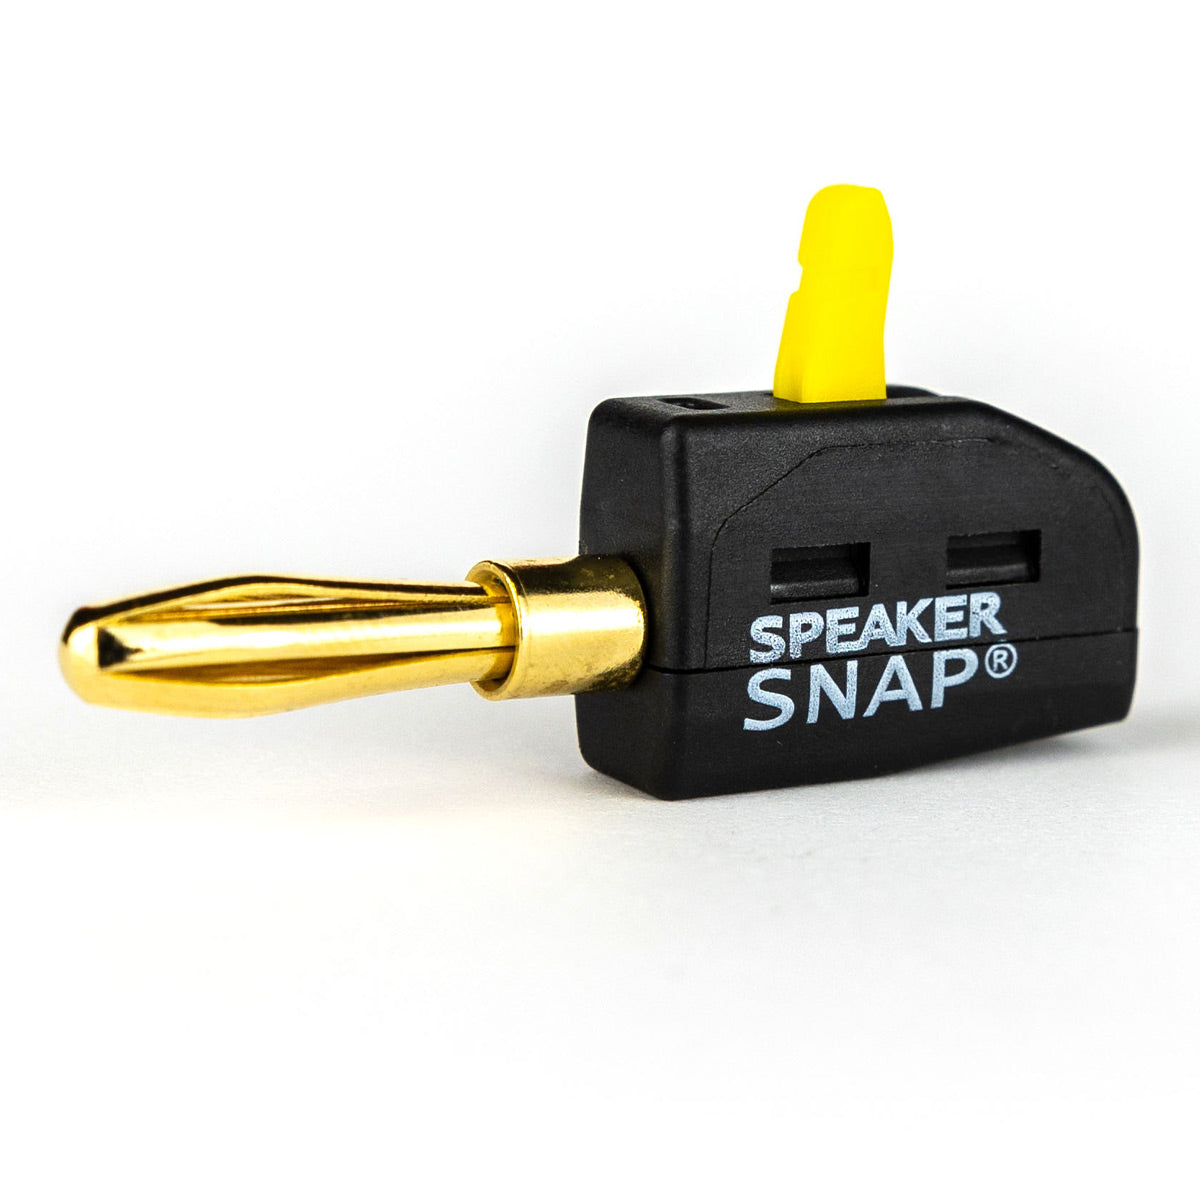 Speaker Snap 4 Count of Fast & Secure Banana Plugs, Gold Plated, 12-24 AWG, for Home Theaters, Speaker Wire, Wall Plates, and Receivers